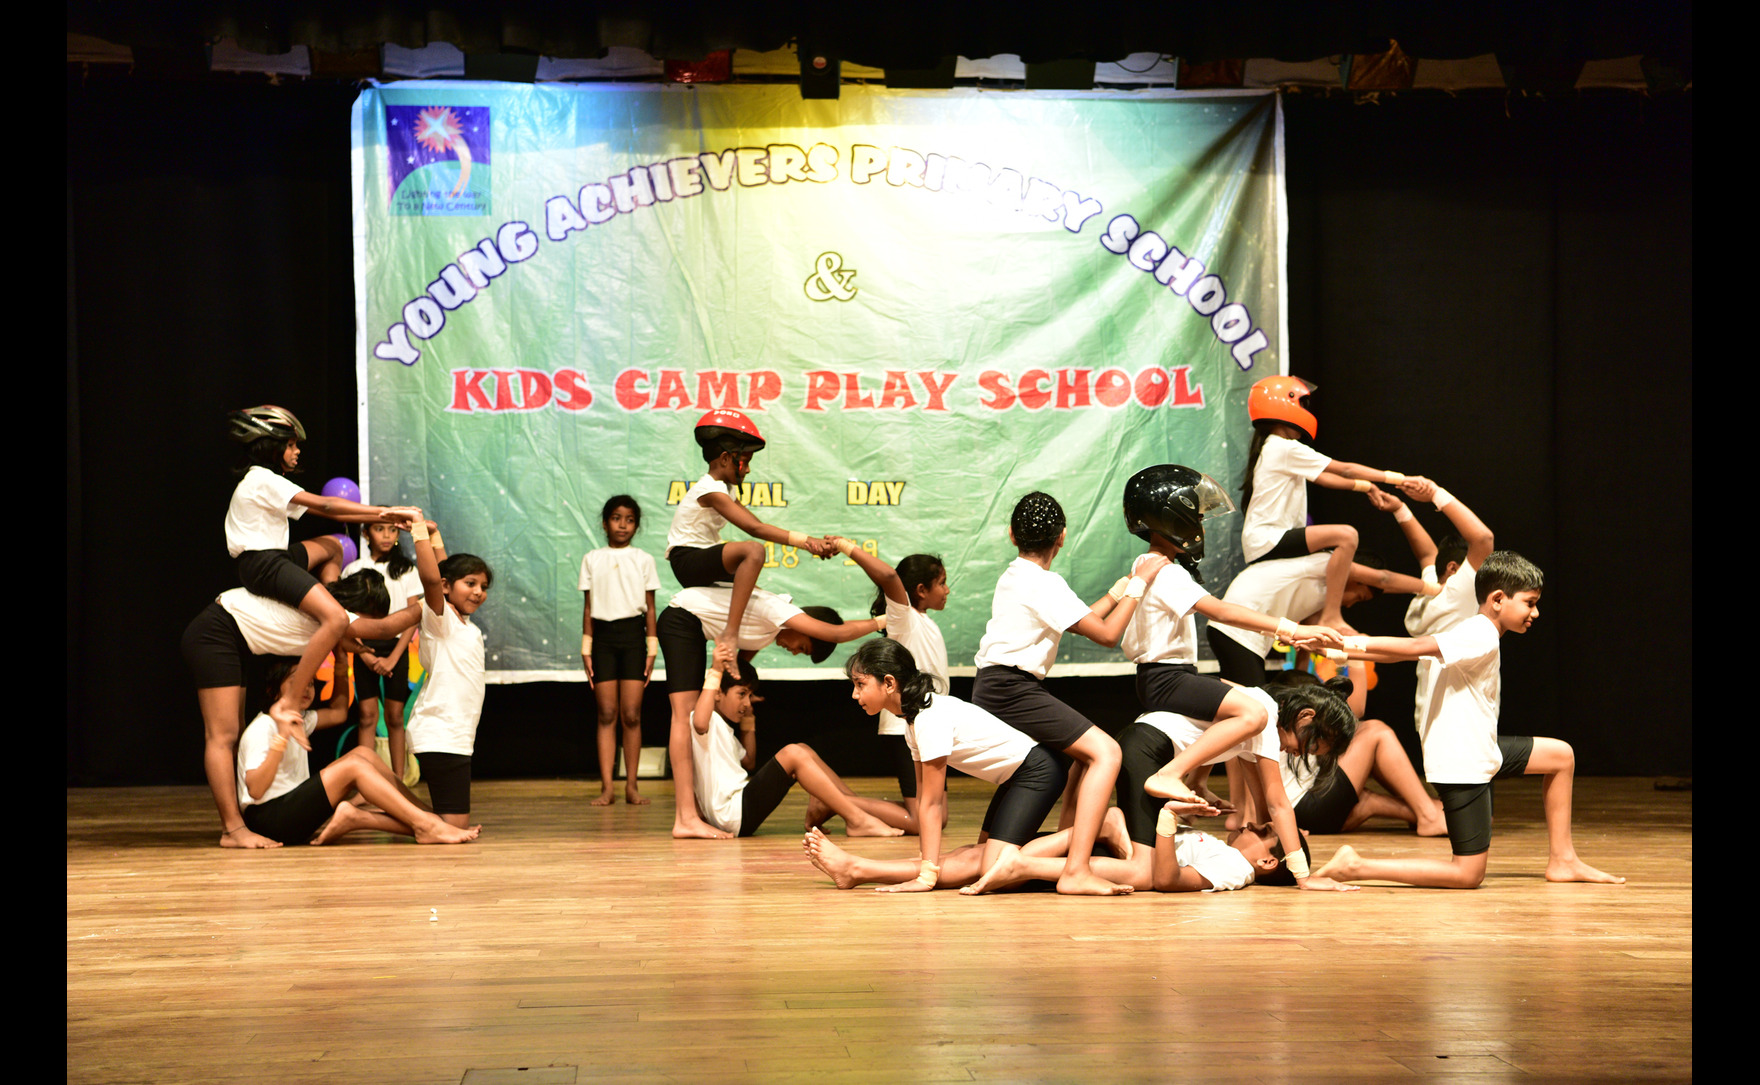 Annual Day Image